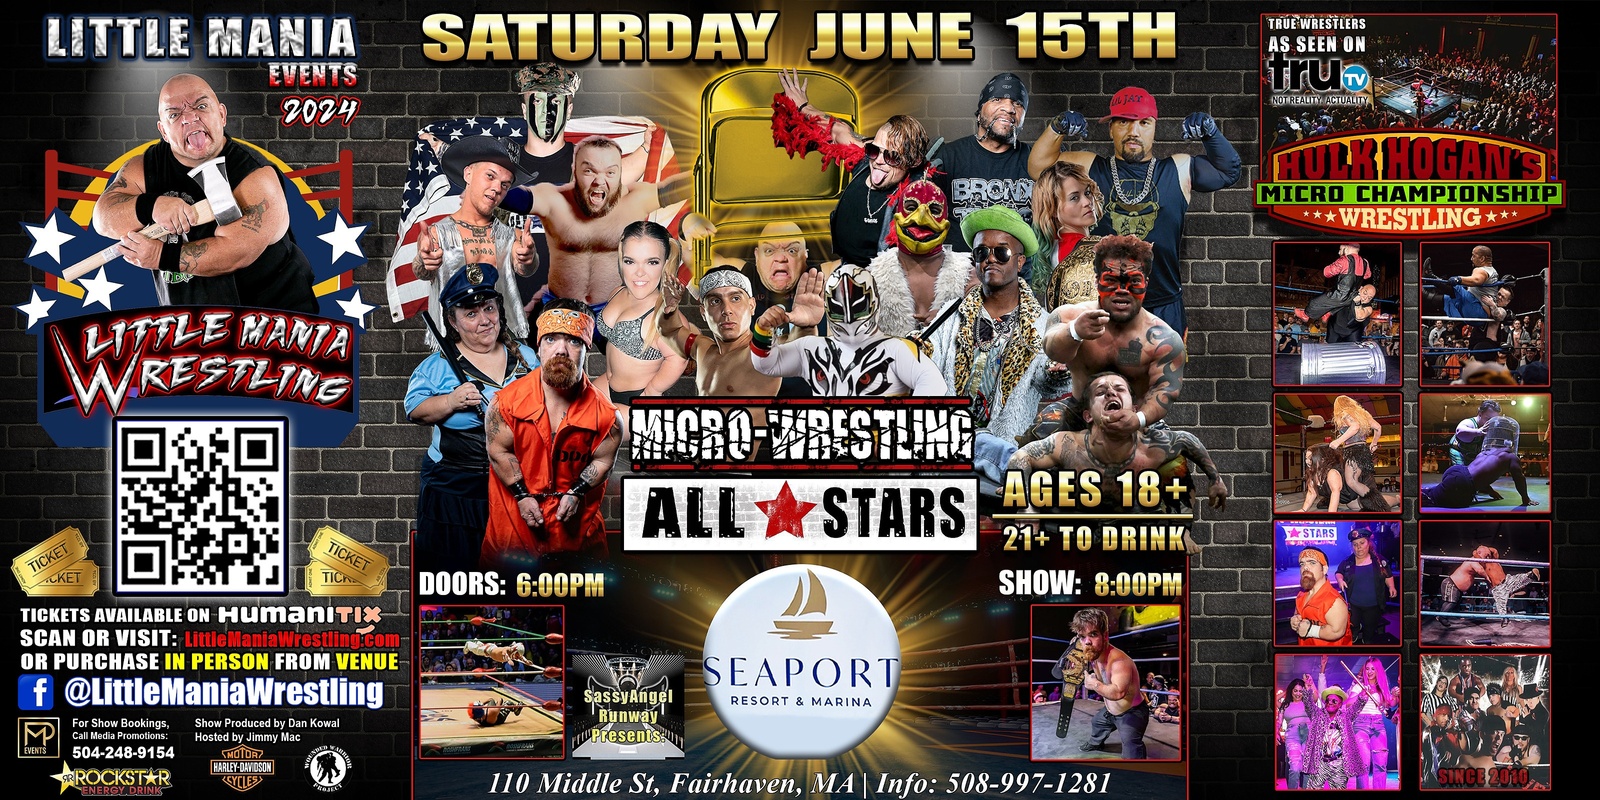 Banner image for Fairhaven, MA - Micro-Wrestling All * Stars: Round 2! Show #2 Ages 18+! Little Mania Rips Through the Ring!